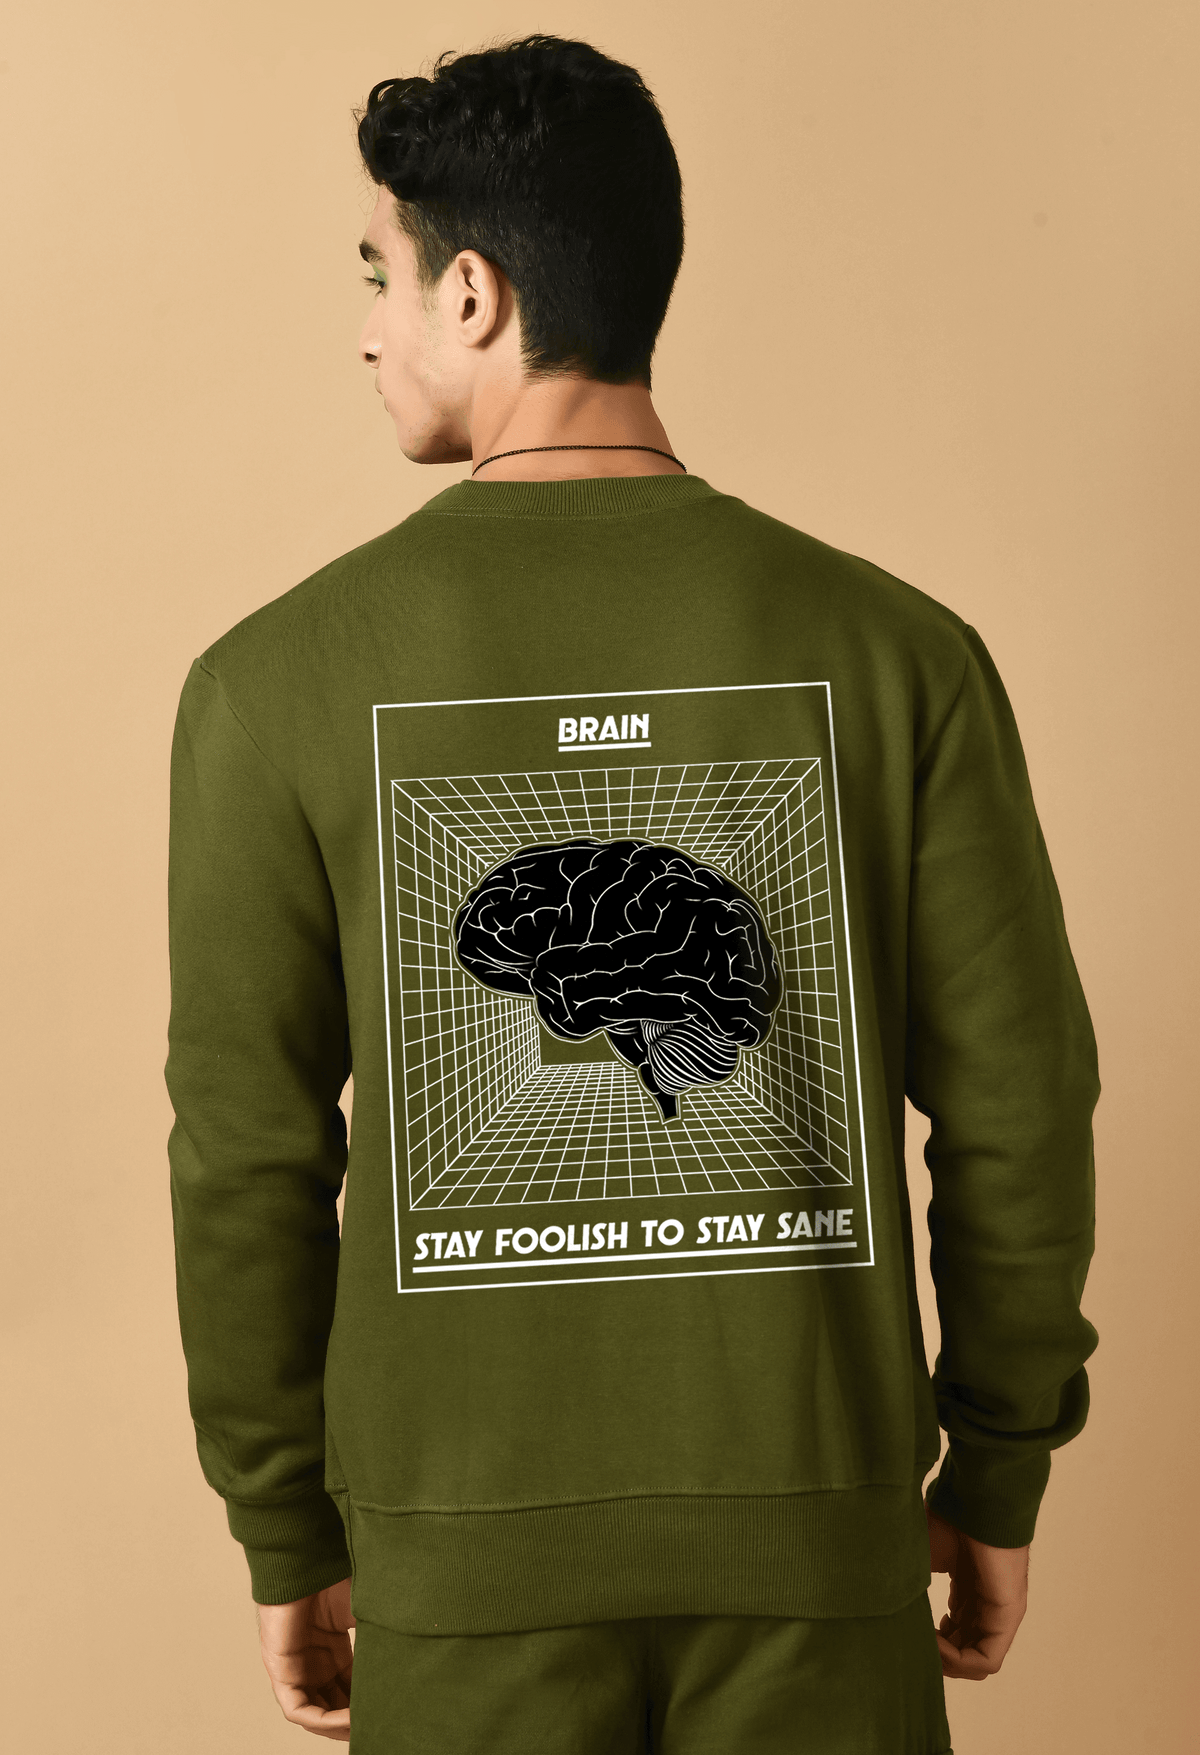 Brain printed olive green color sweatshirt by offmint